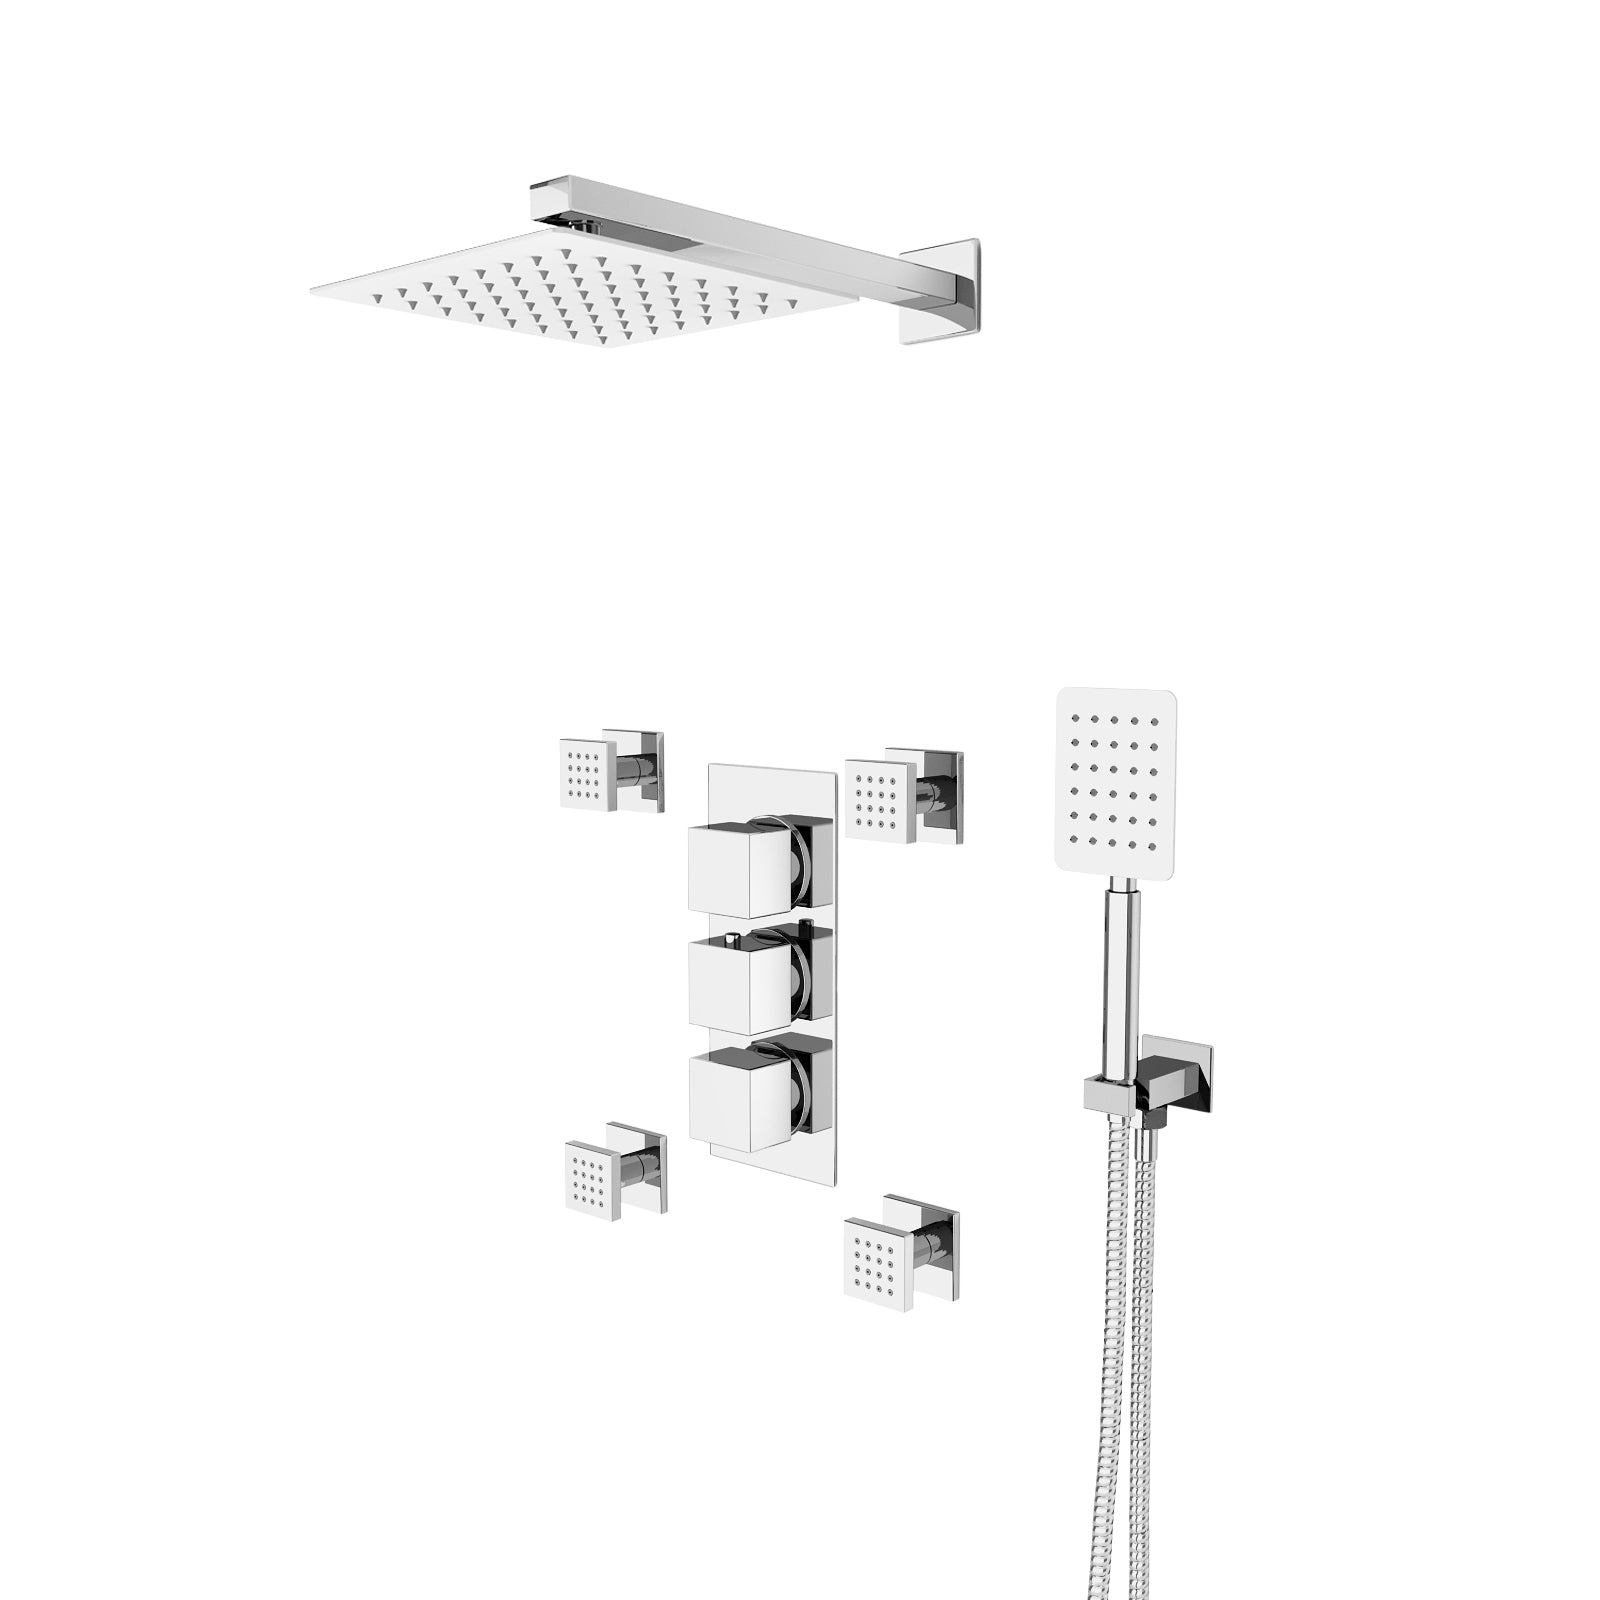 Olive Square 3 Way Concealed Thermostatic Shower Mixer Valve, Shower Head, Handheld, 4x Body Jets Set Chrome